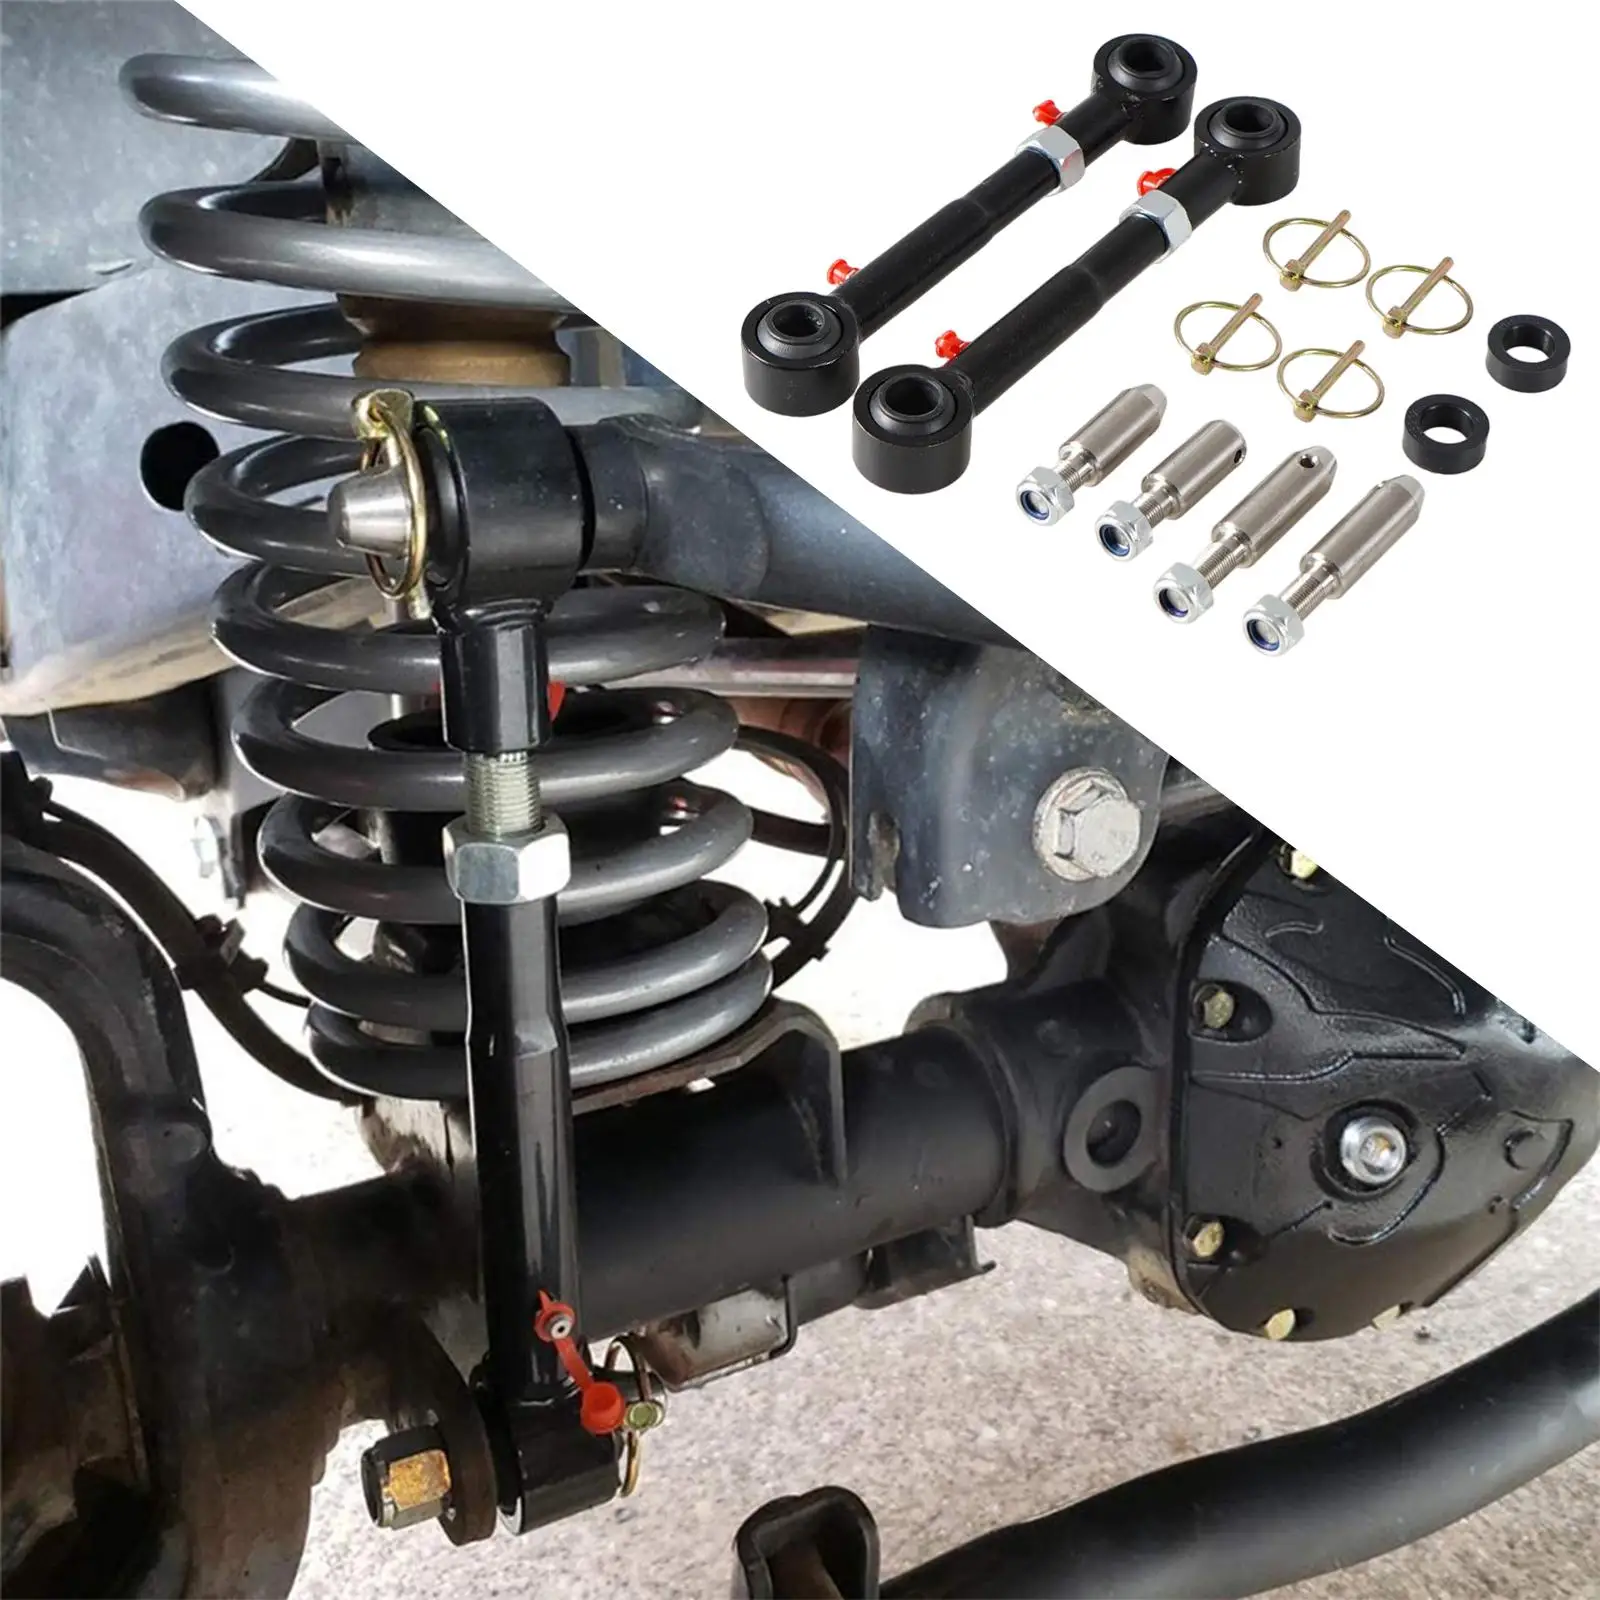 Front Sway Bar Links Disconnects Metal for JK 07-18